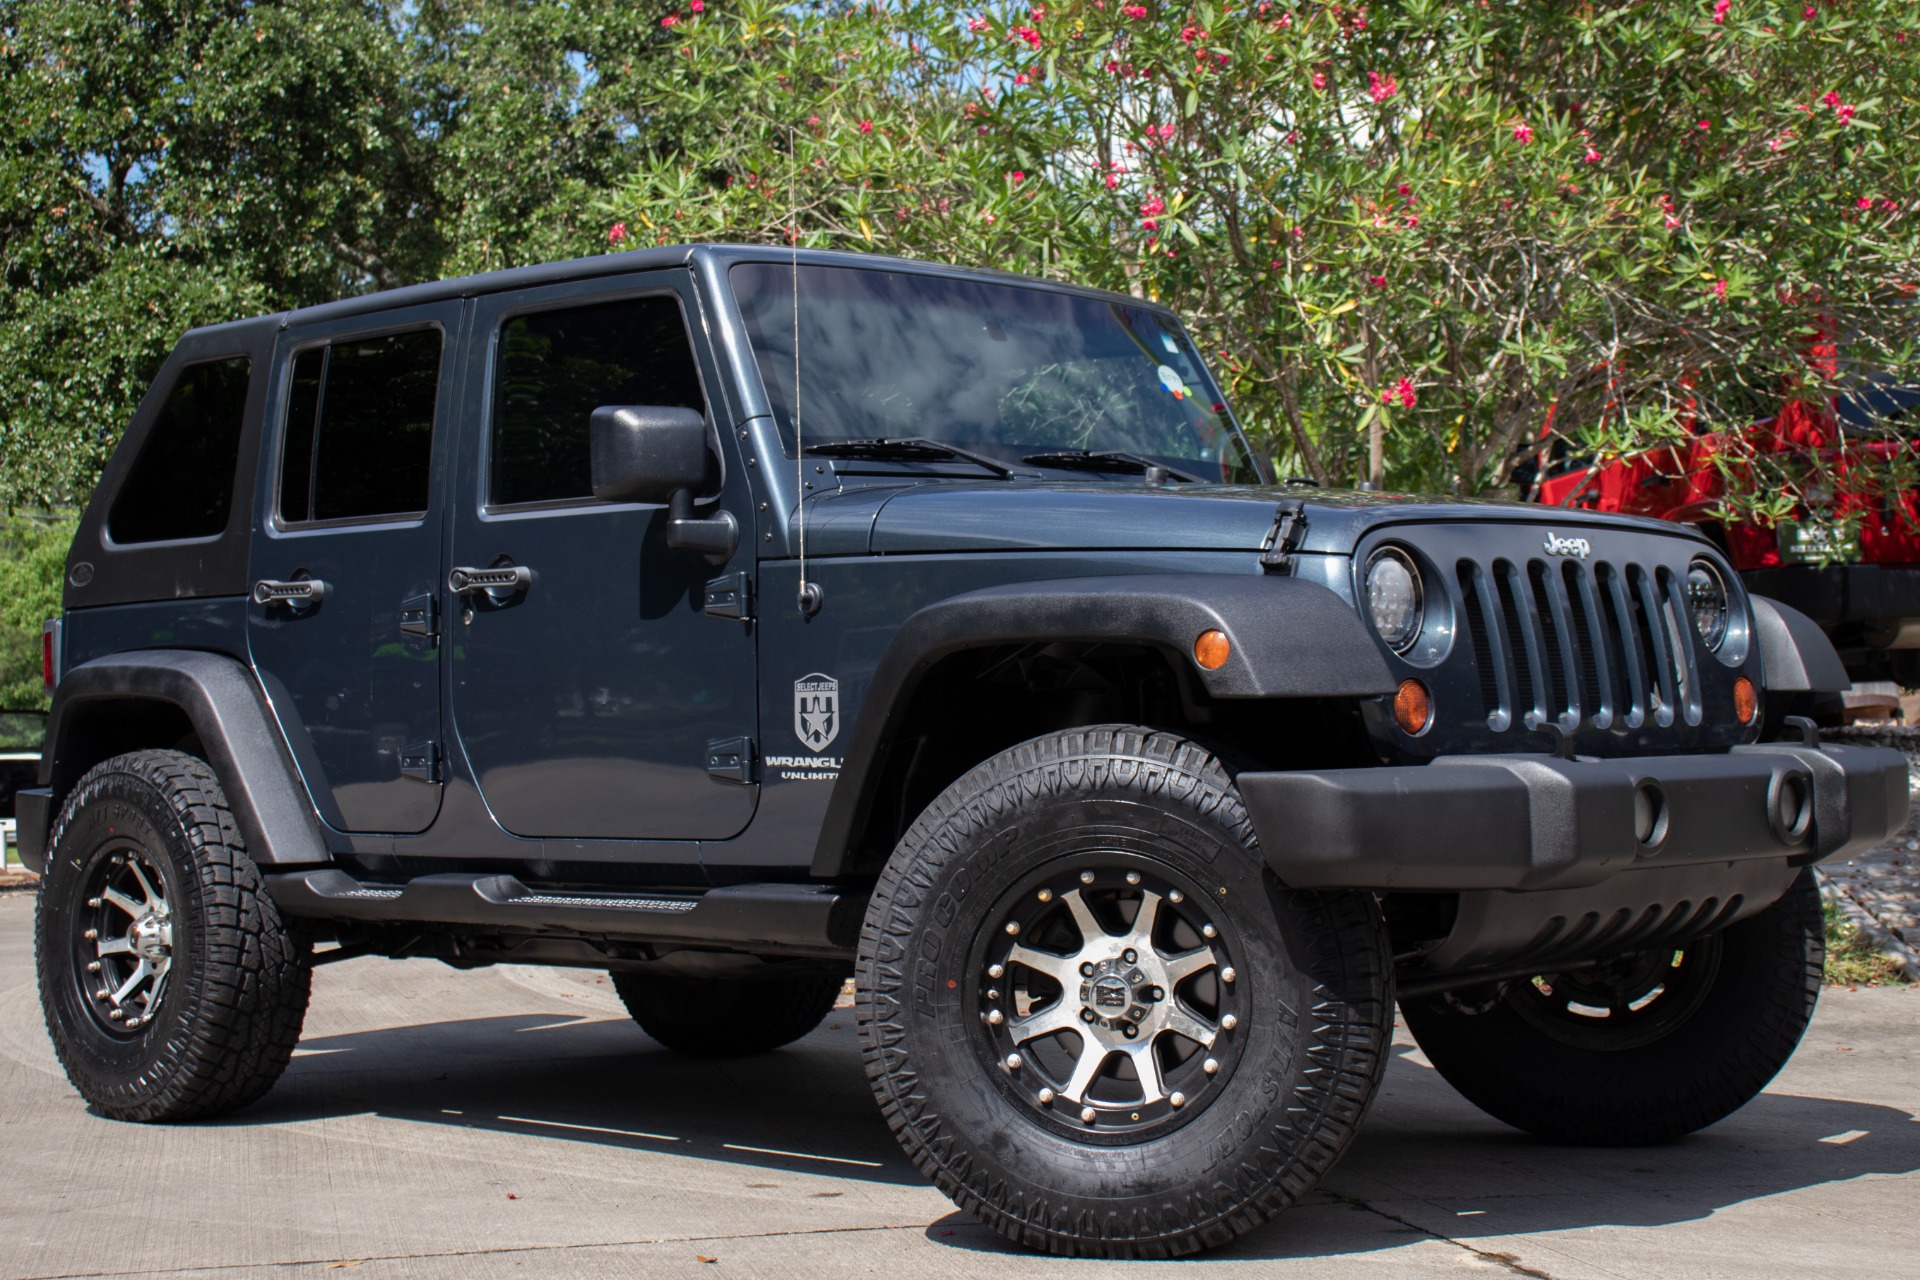 Used 2008 Jeep Wrangler Unlimited X  For Sale 21 995 